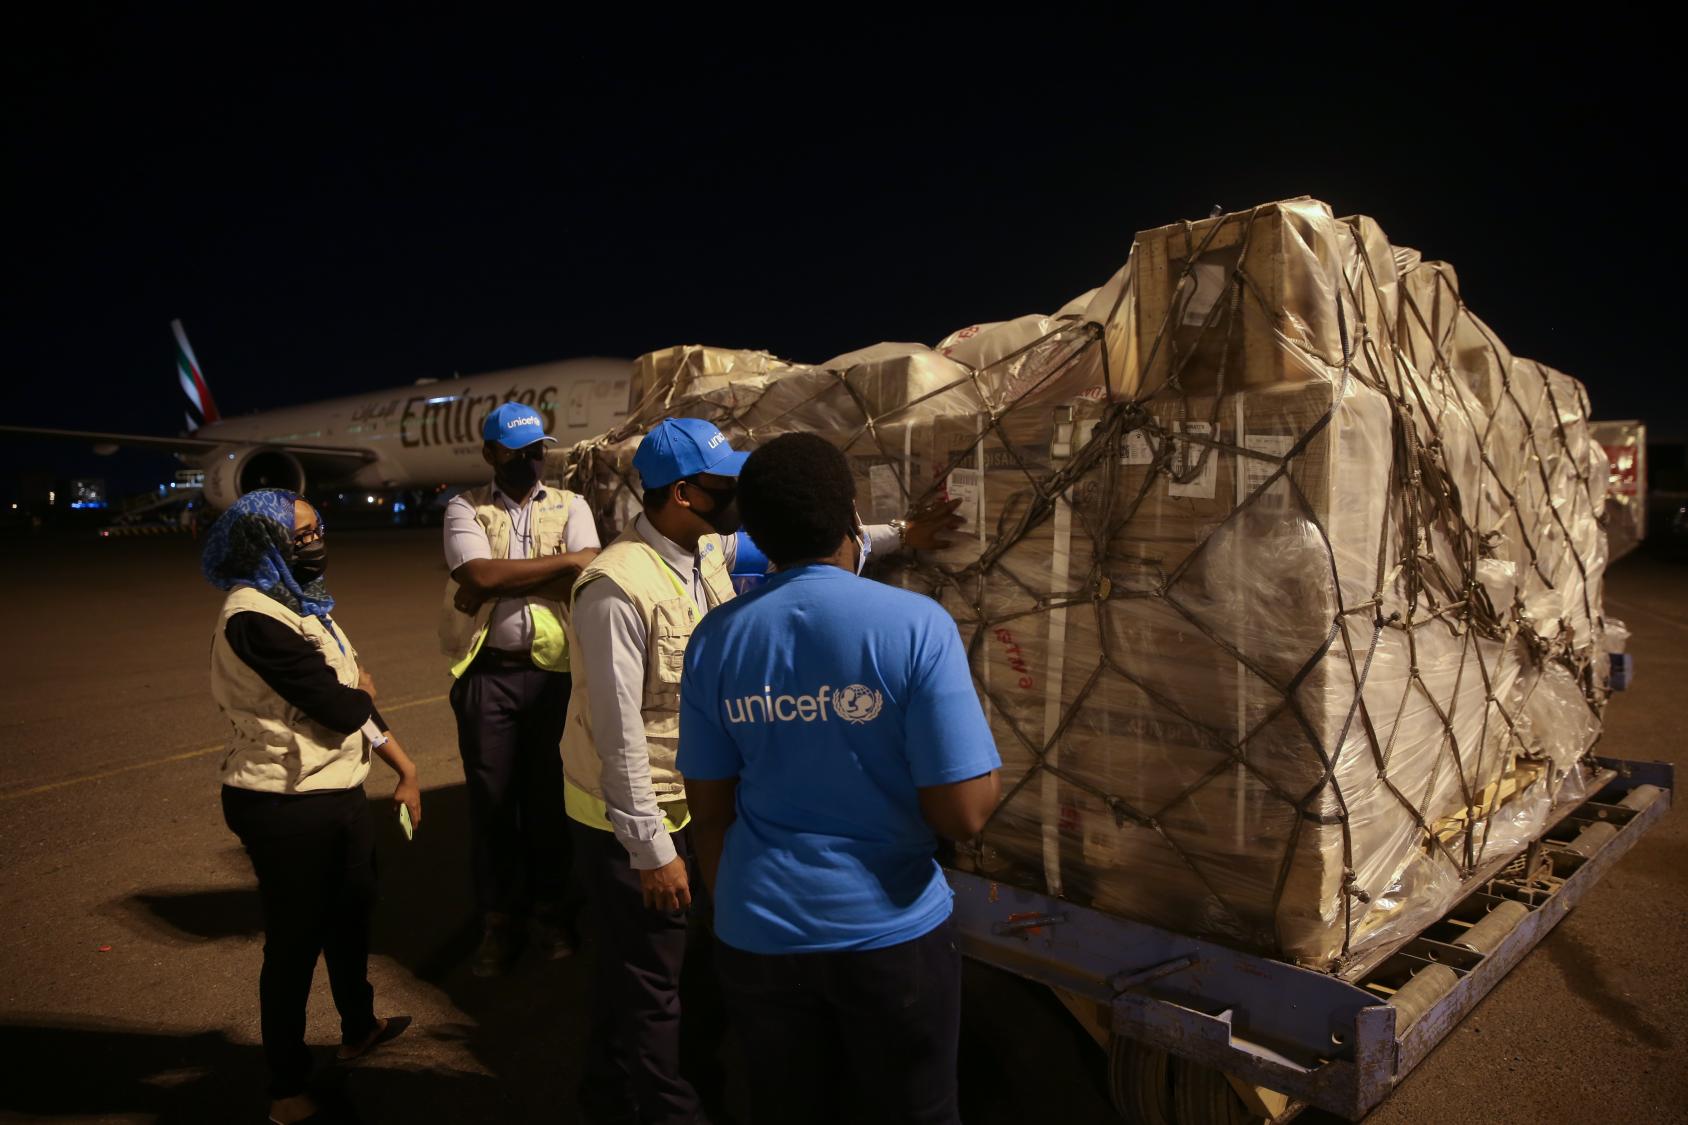 Four people stand next to a large shipment of vaccines wrapped with ropes. 